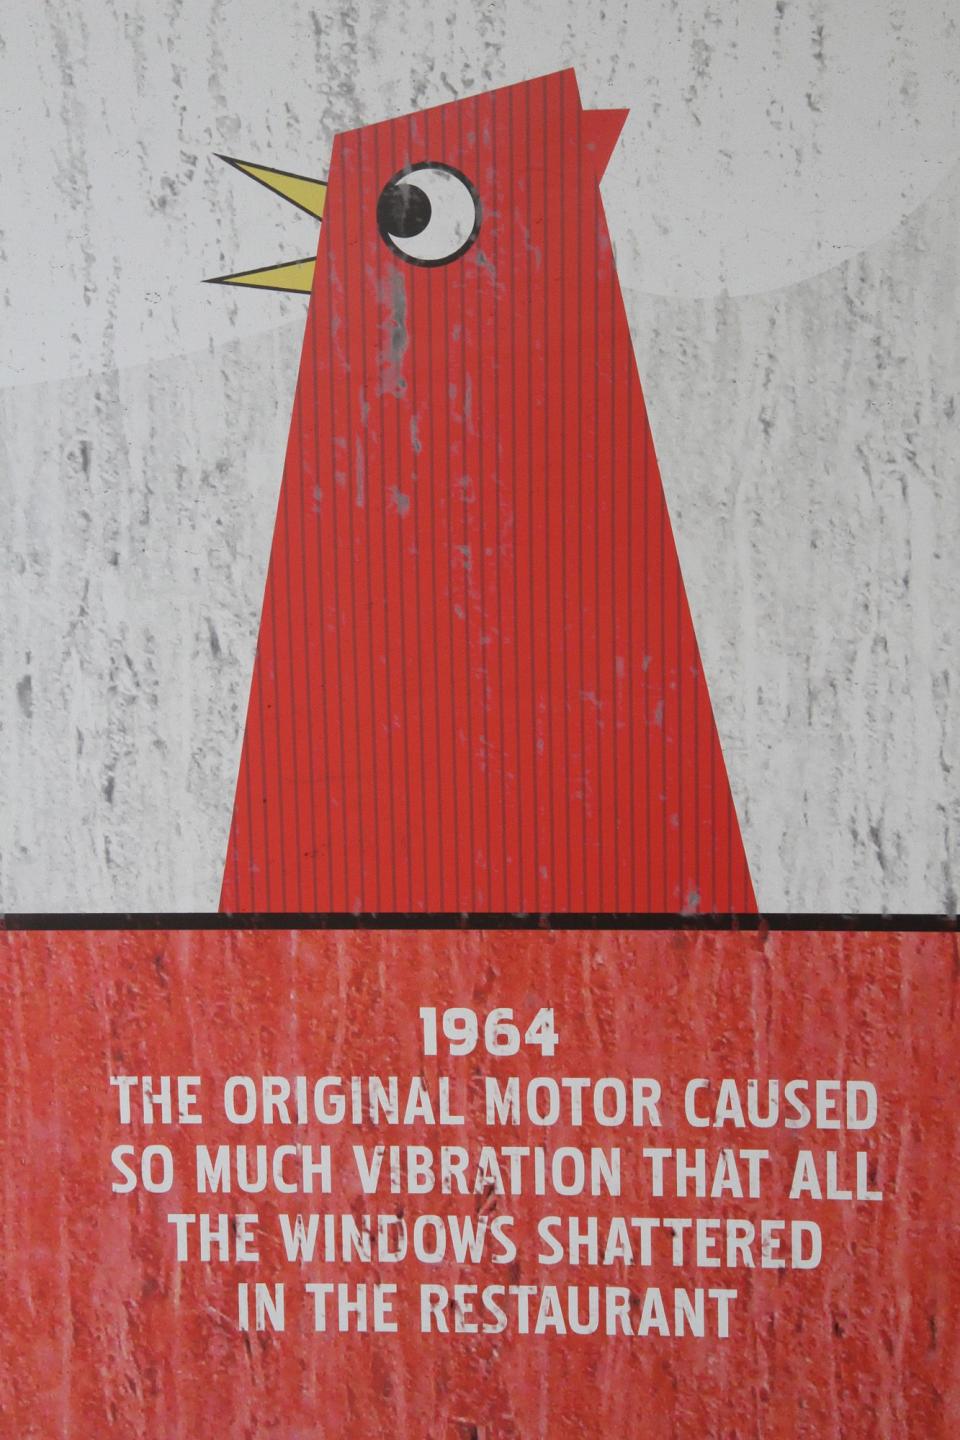 In 1964, the original motor caused so much vibration that all the windows shattered in the restaurant.